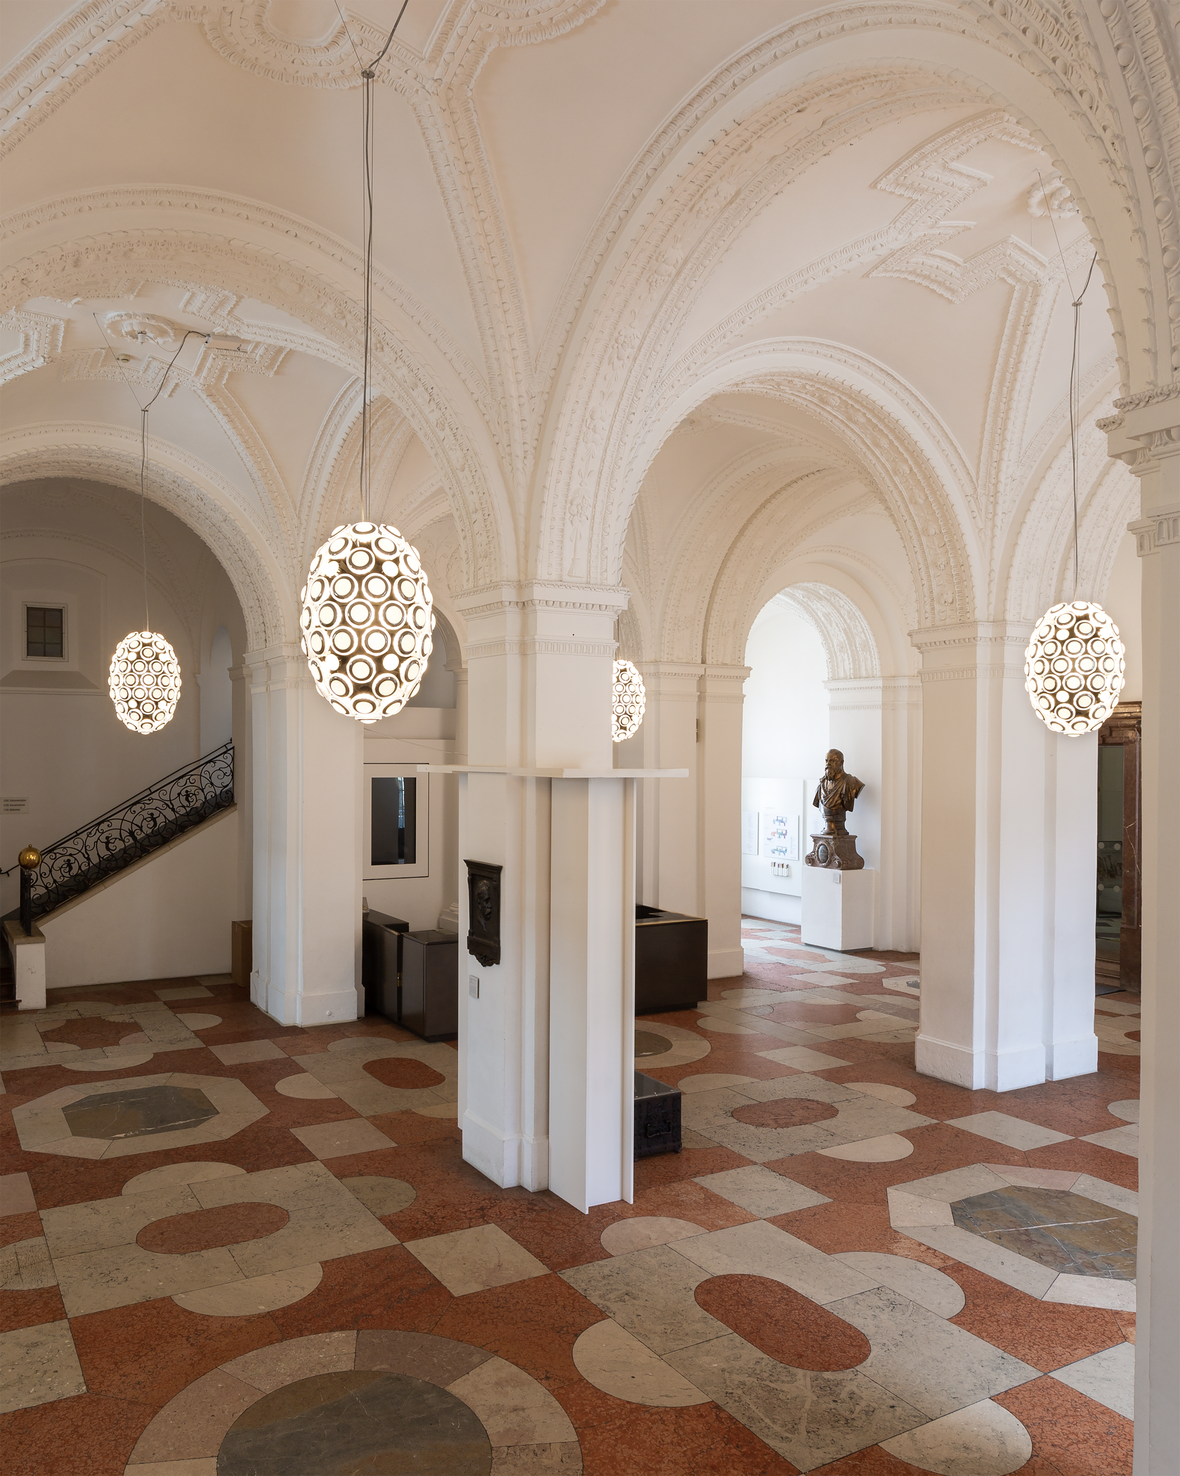 Iconic Eyes suspension light in Bavarian National Museum 1